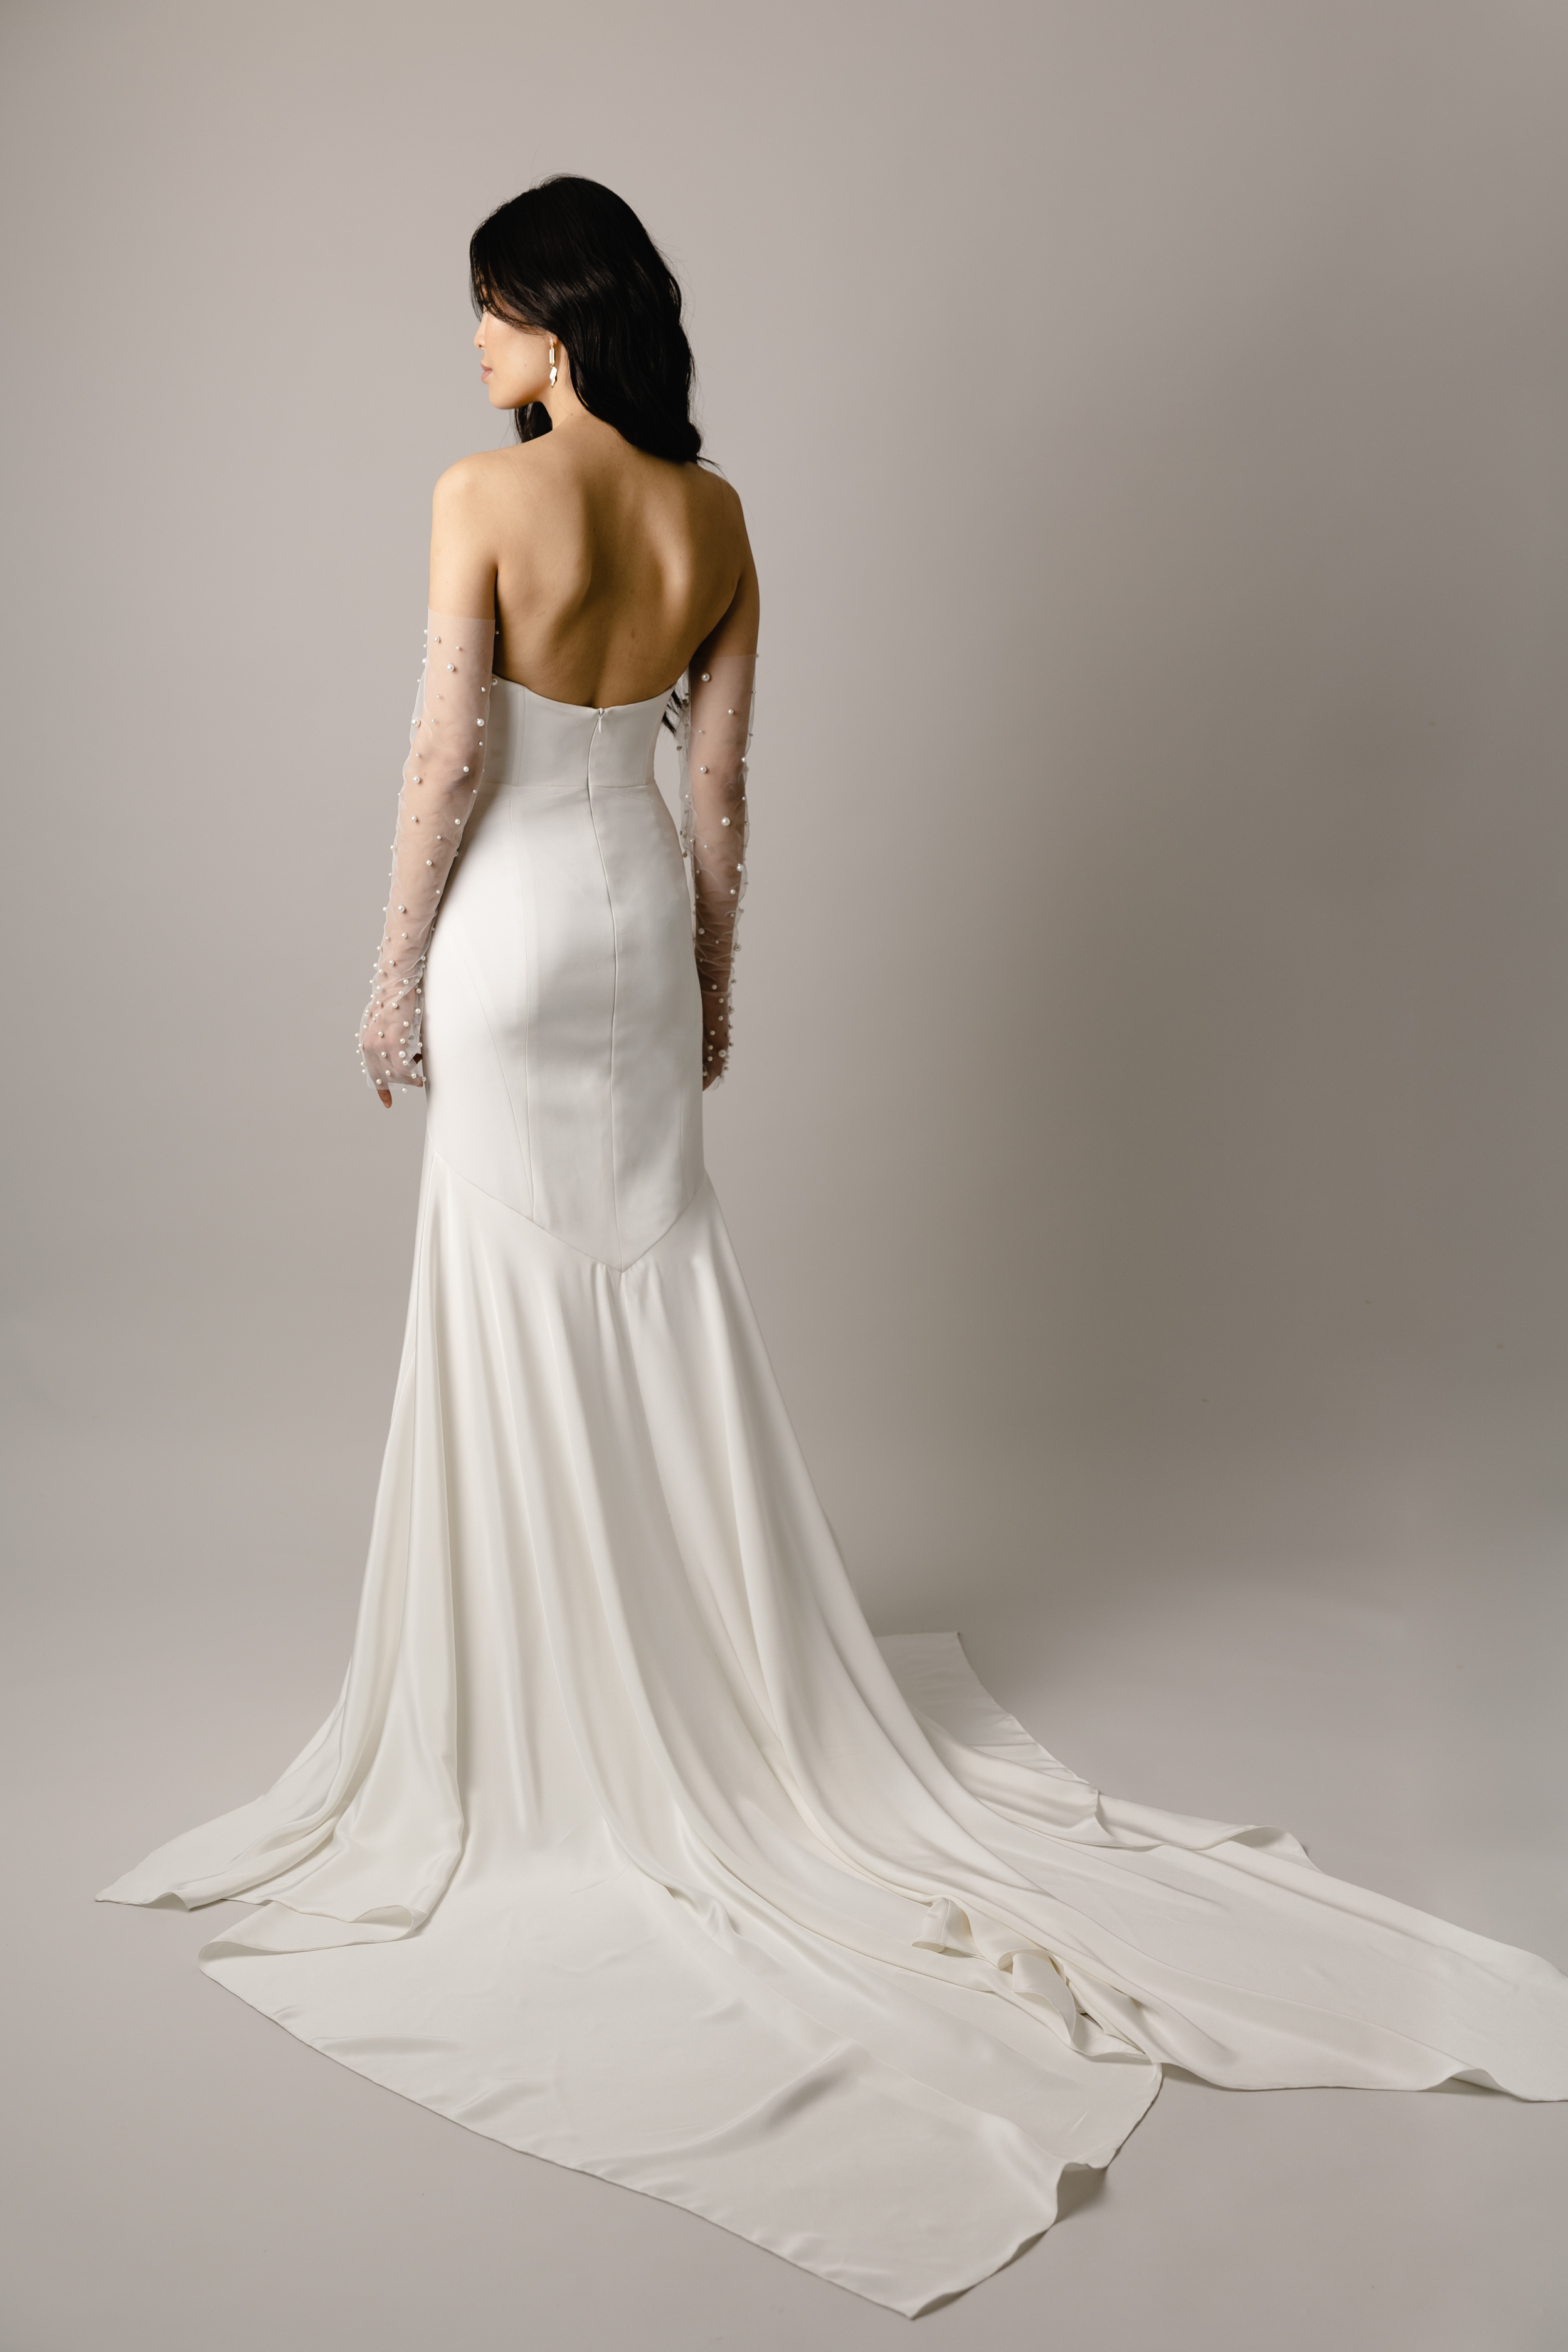 Sonoma crepe fit to flare wedding dress with cateye bodice6web.png